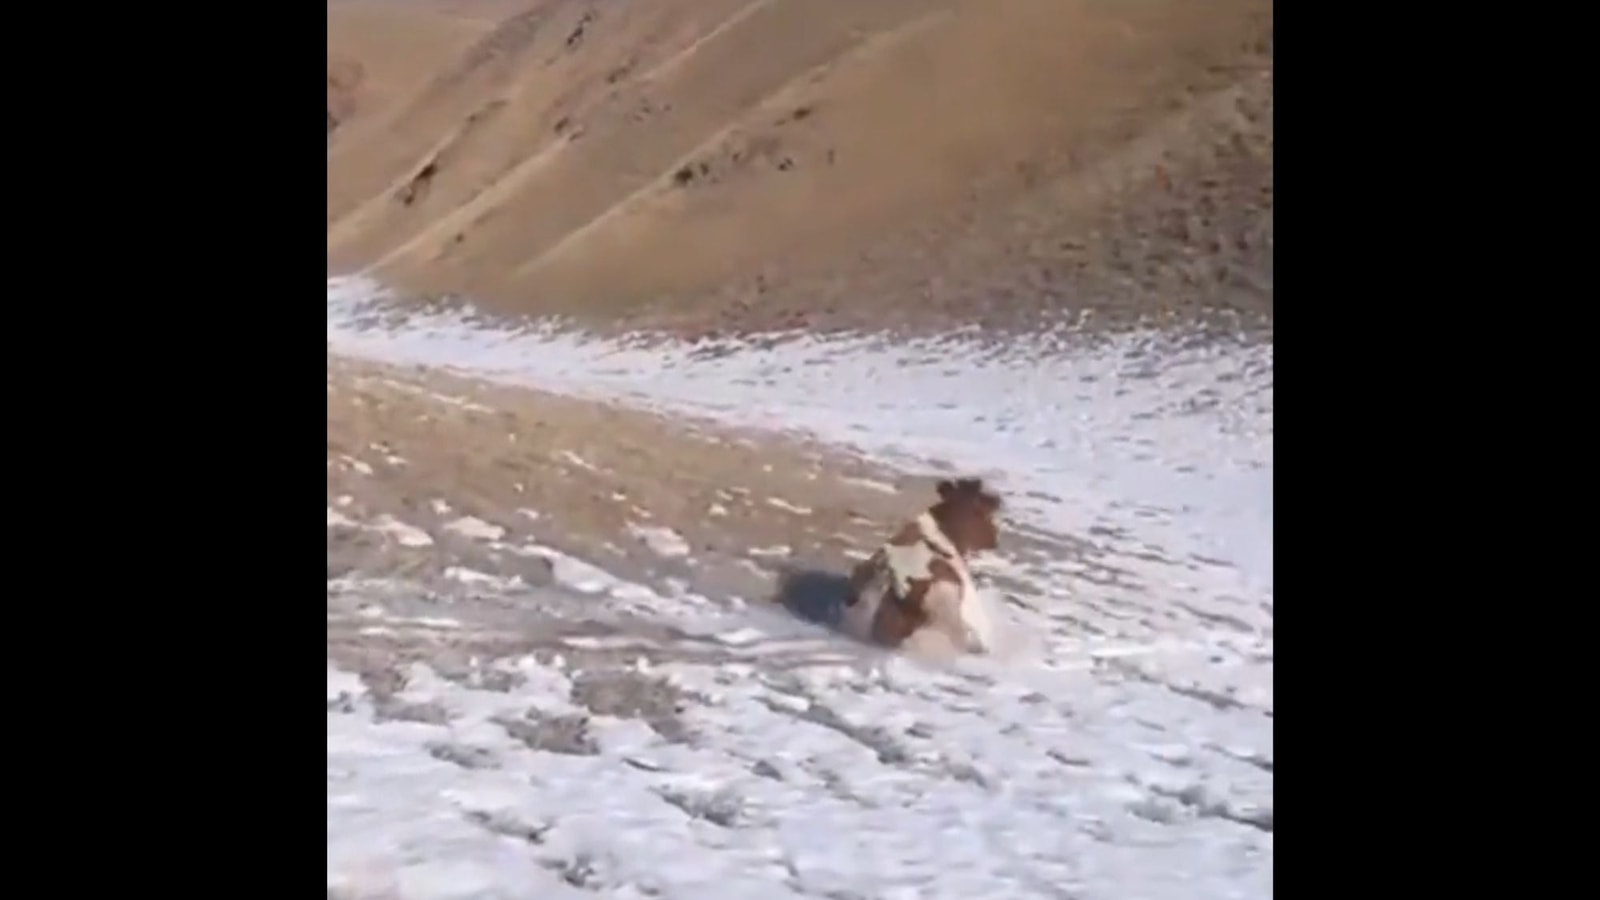 Cow slides down snowy mountain perfectly, viral video will cure